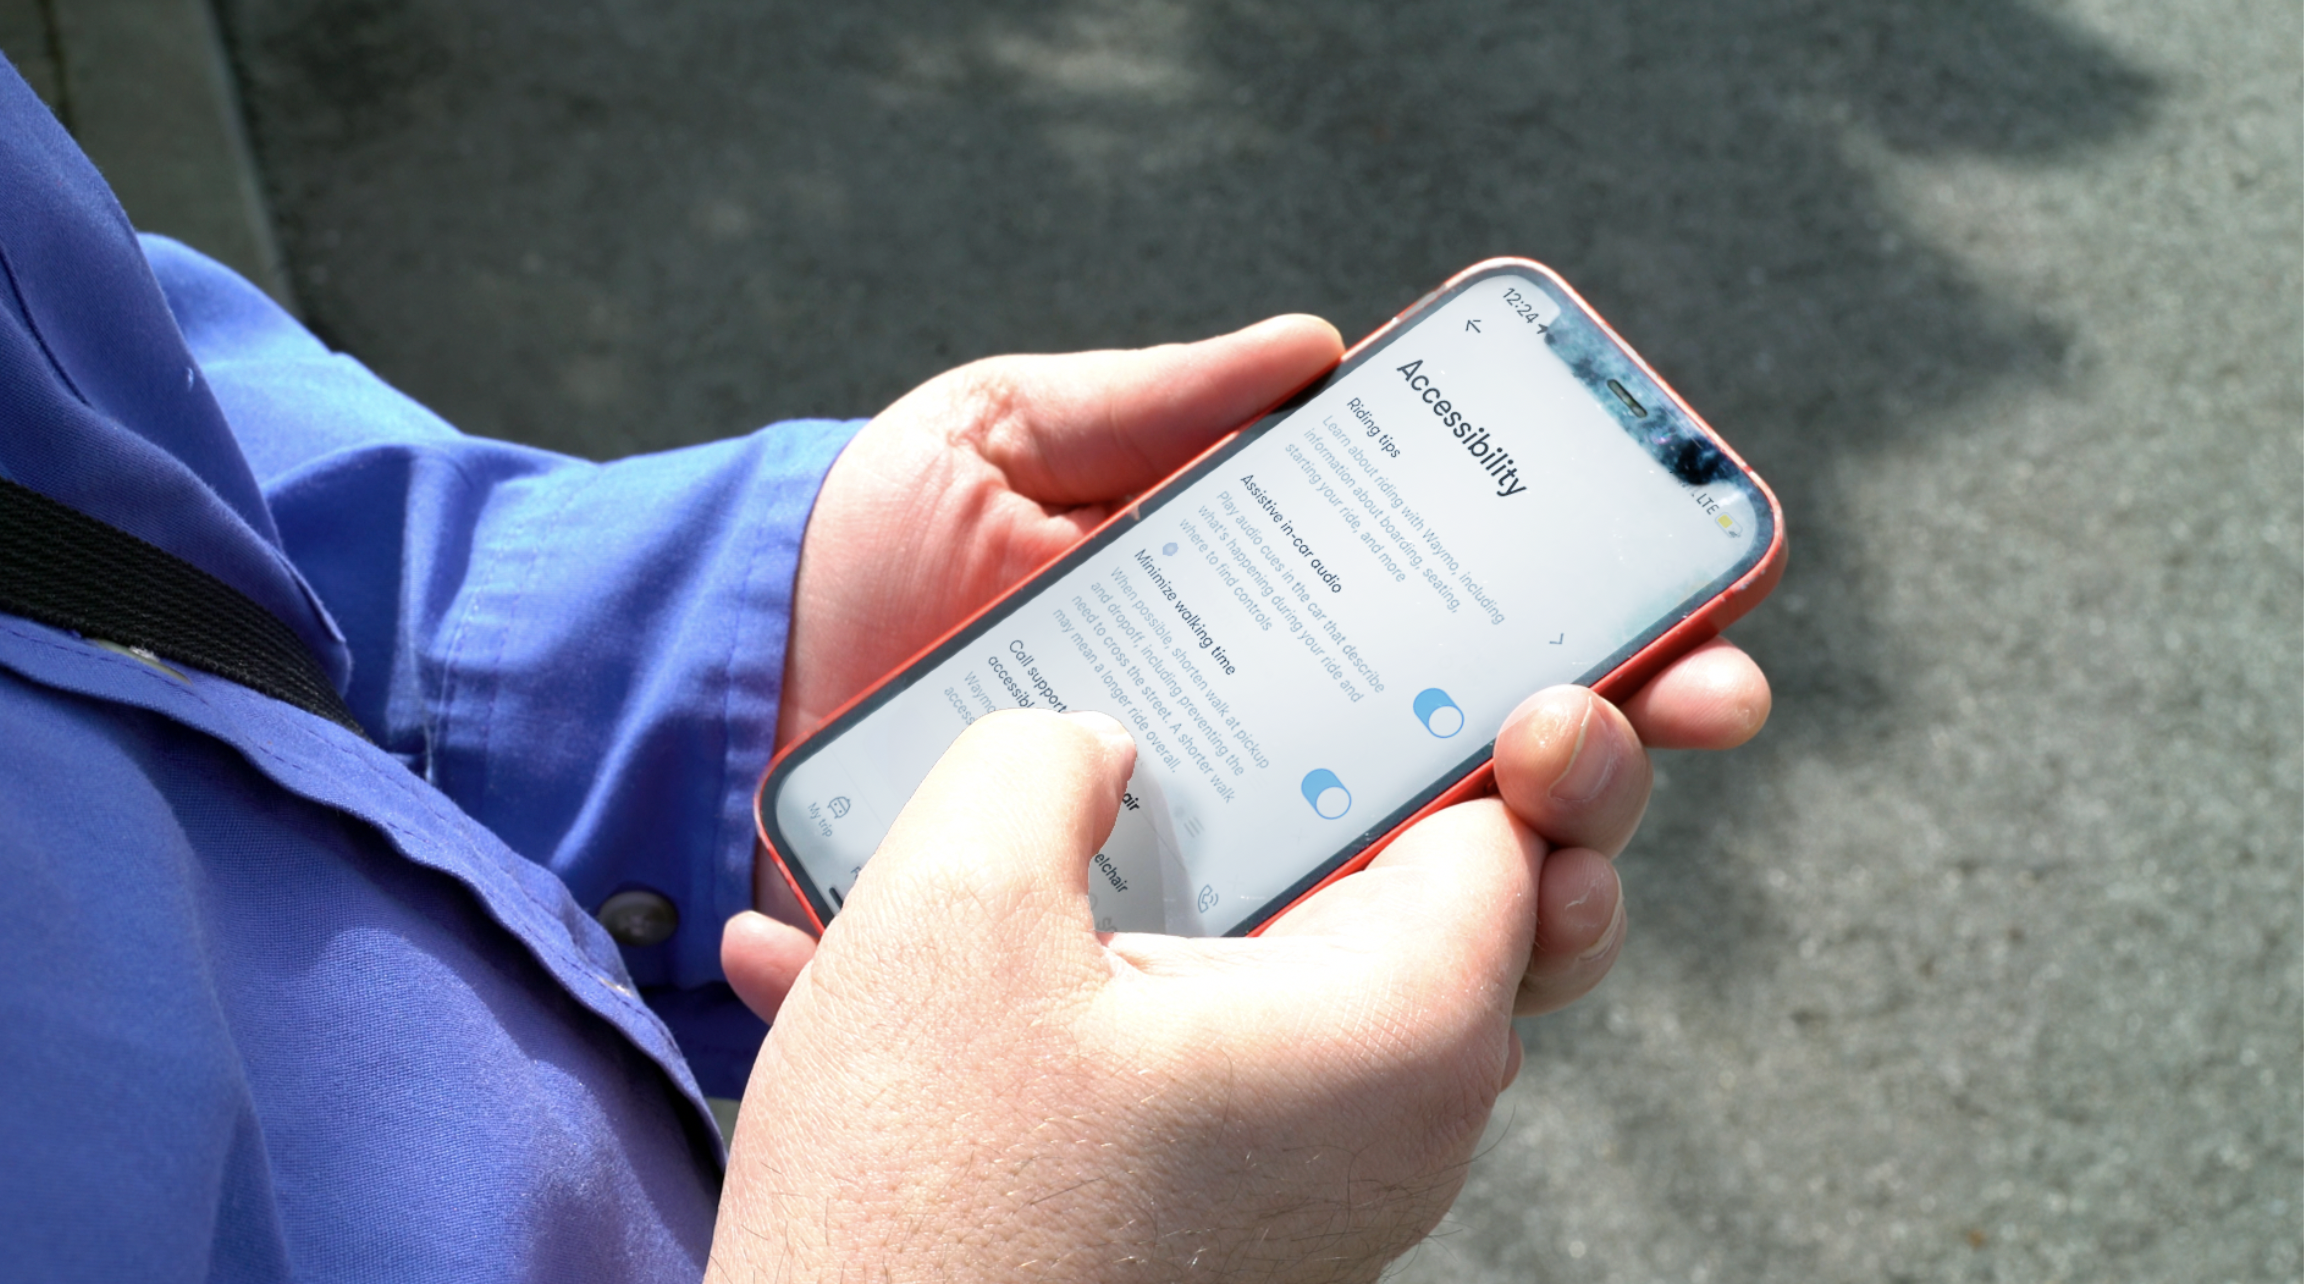 Aerial photo of hands holding a phone with the screen on a settings page titled "Accessibility"